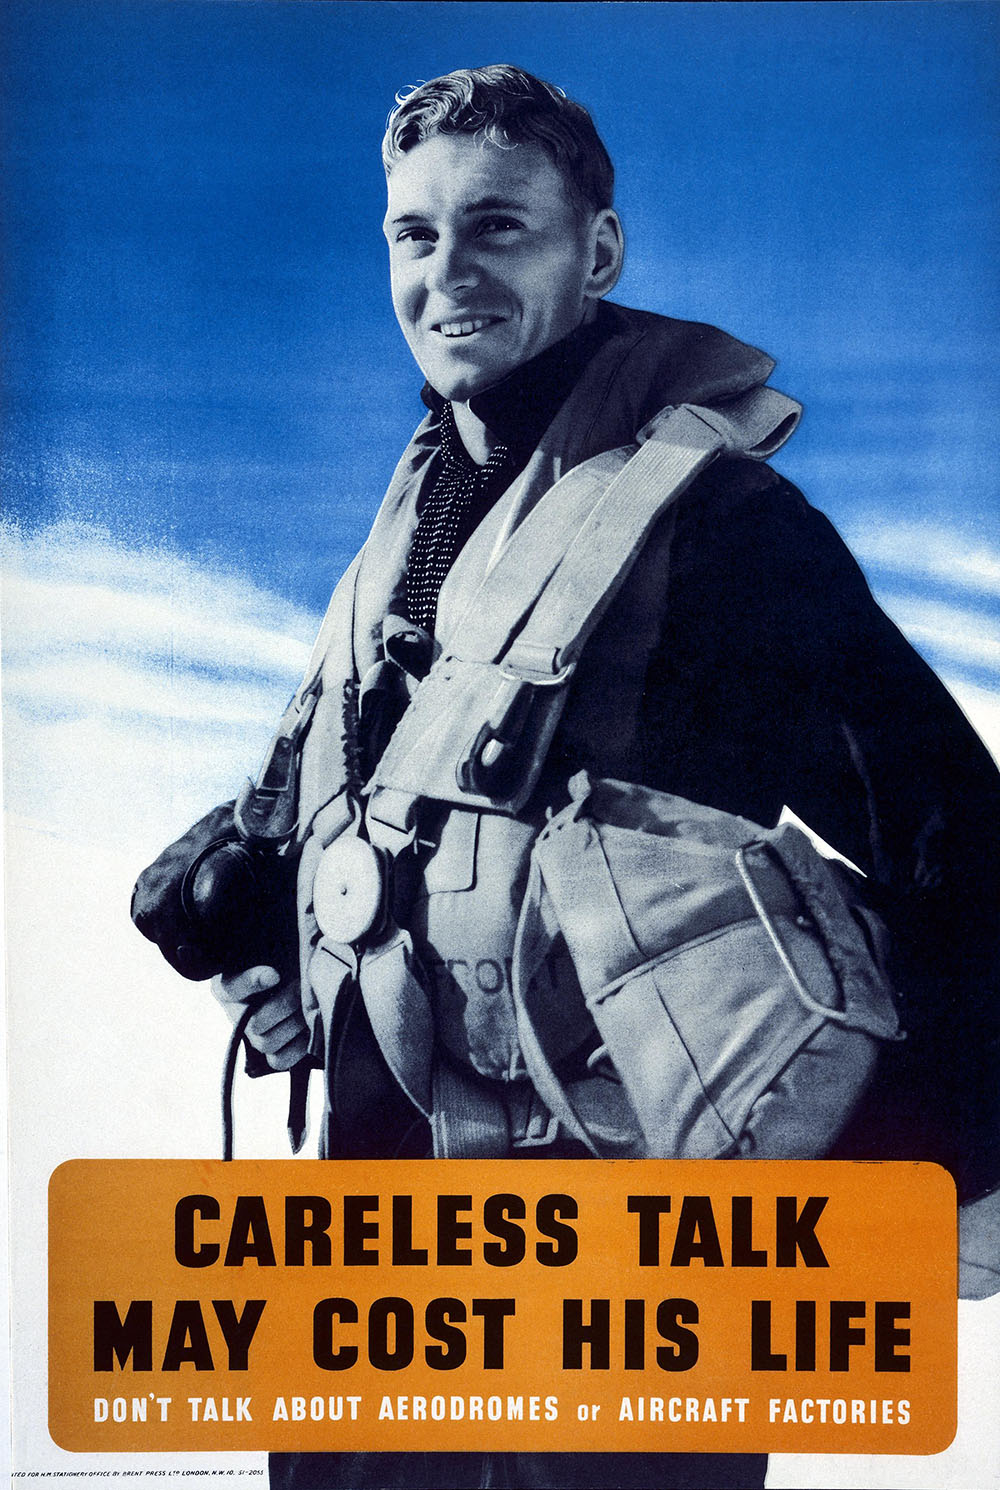 A man in pilot gear smiles at the viewer above the poster slogan.